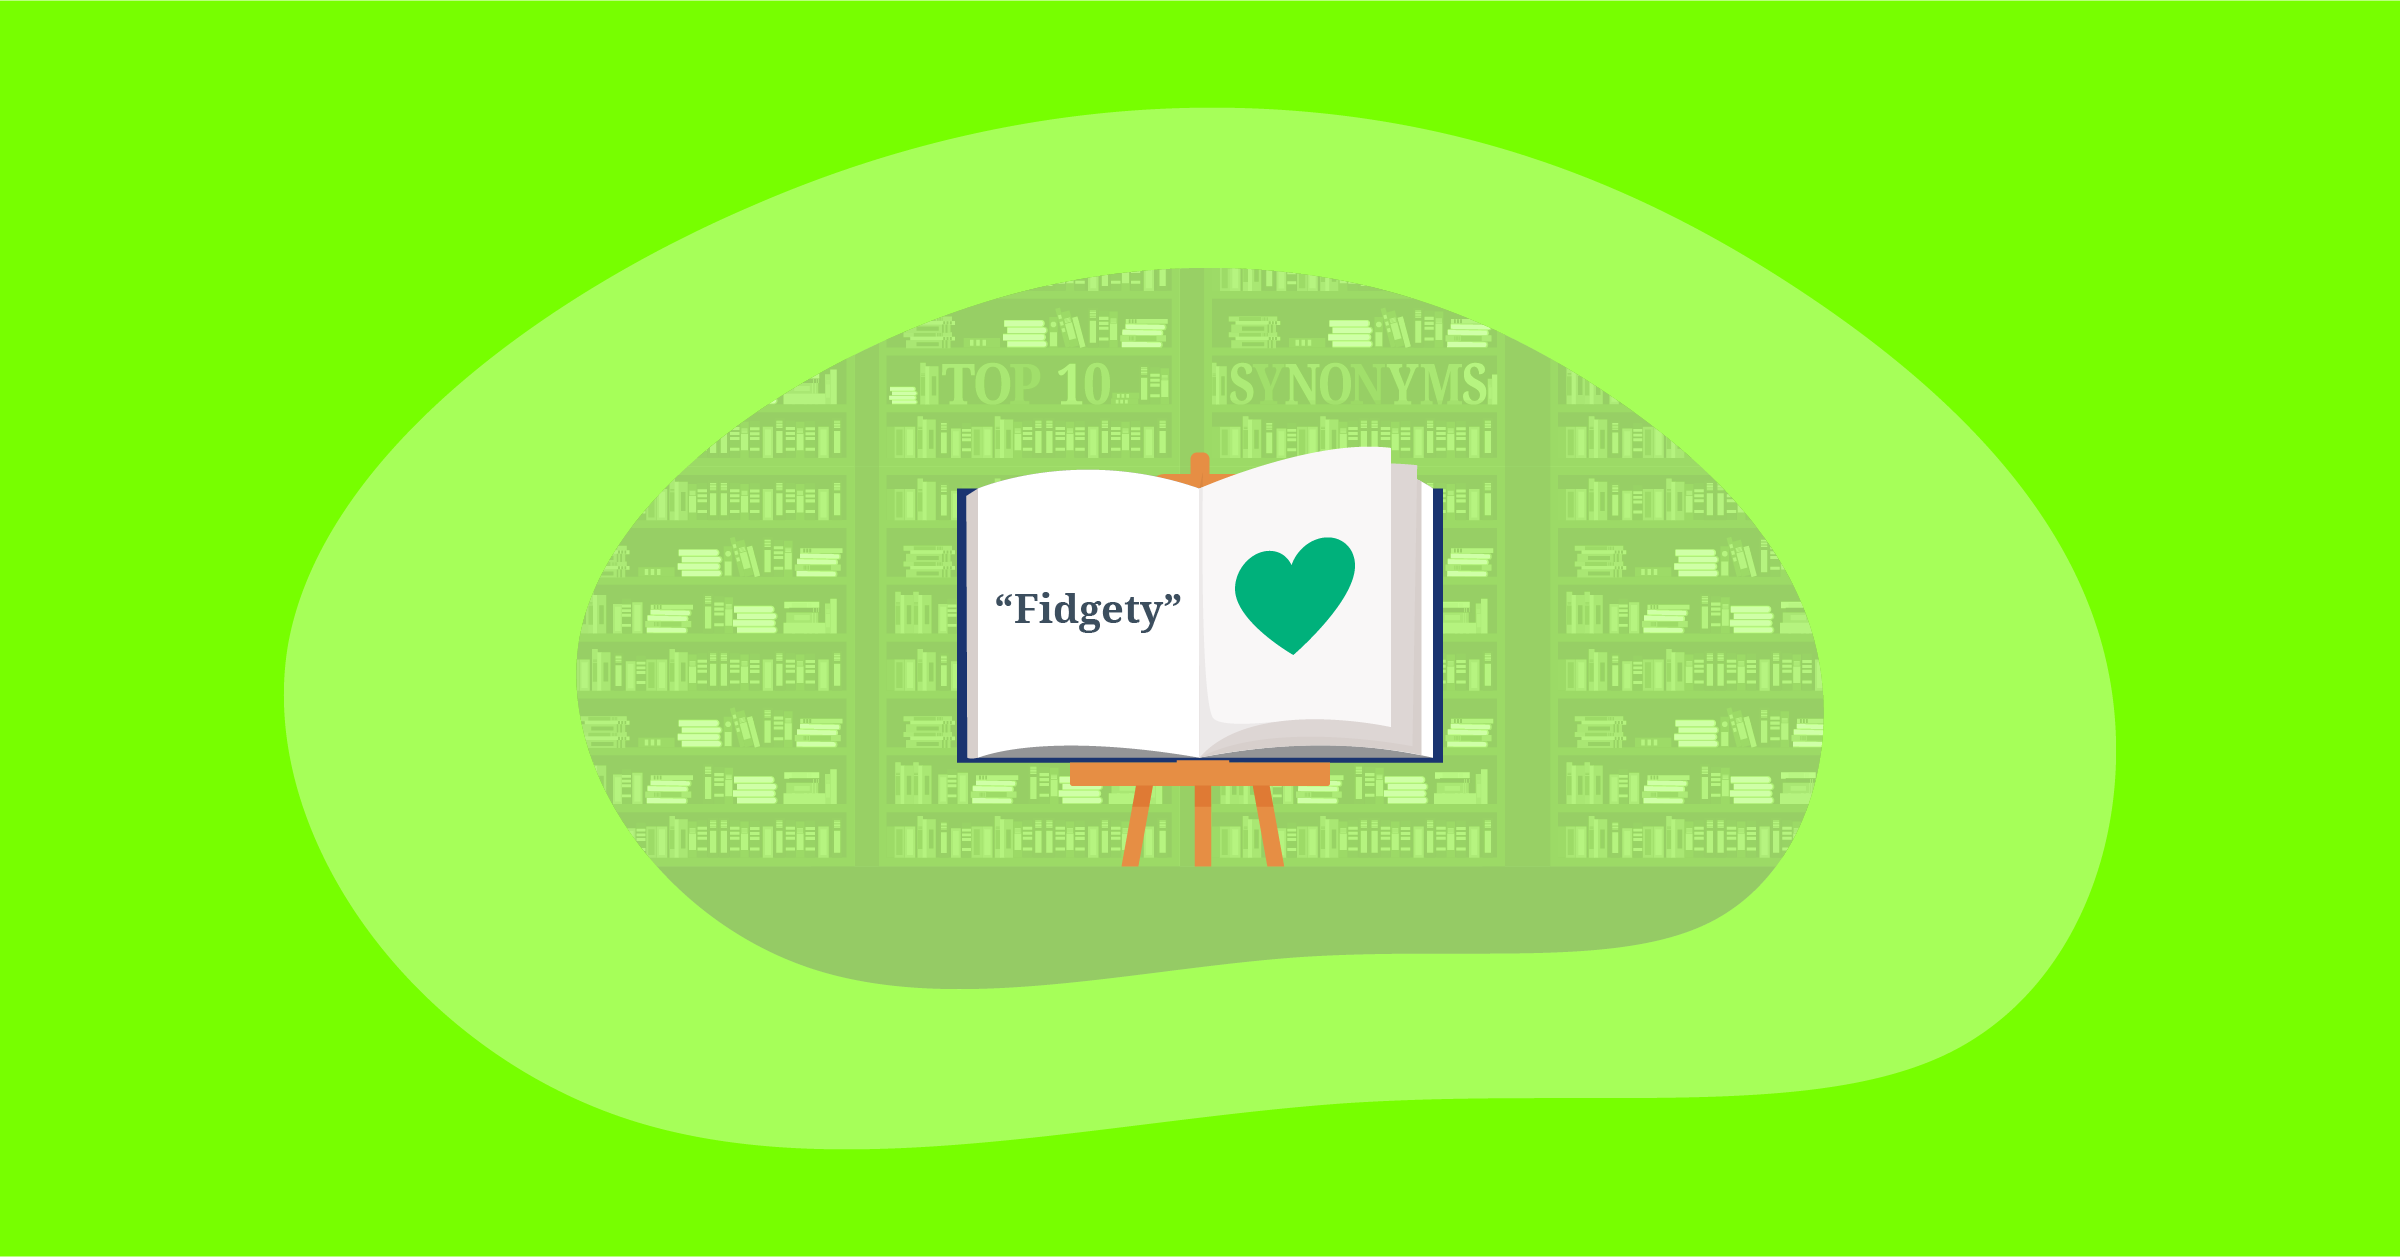 Illustration for top 10 positive impactful words for "Fidgety"